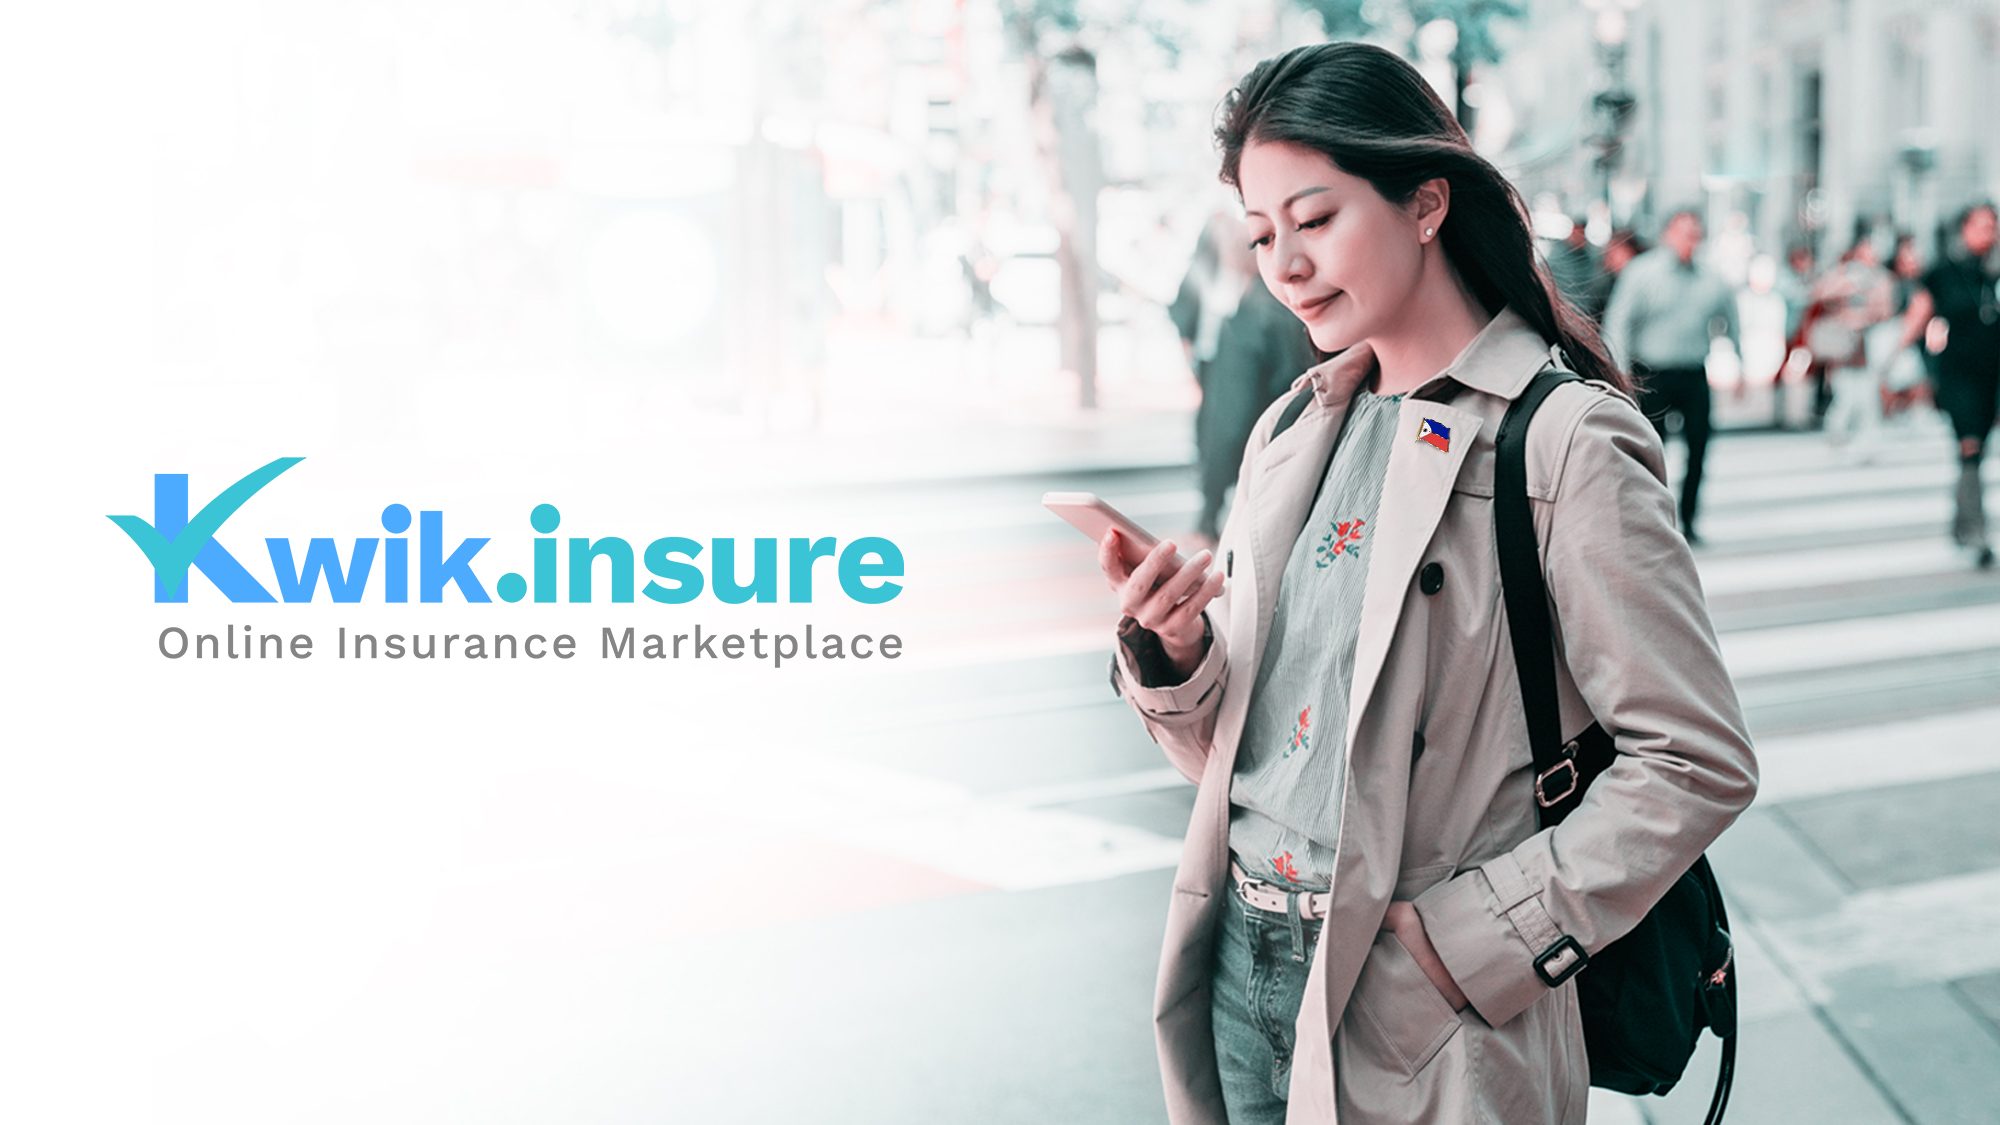 Kwik.insure introduces insurance products for OFWs in online marketplace